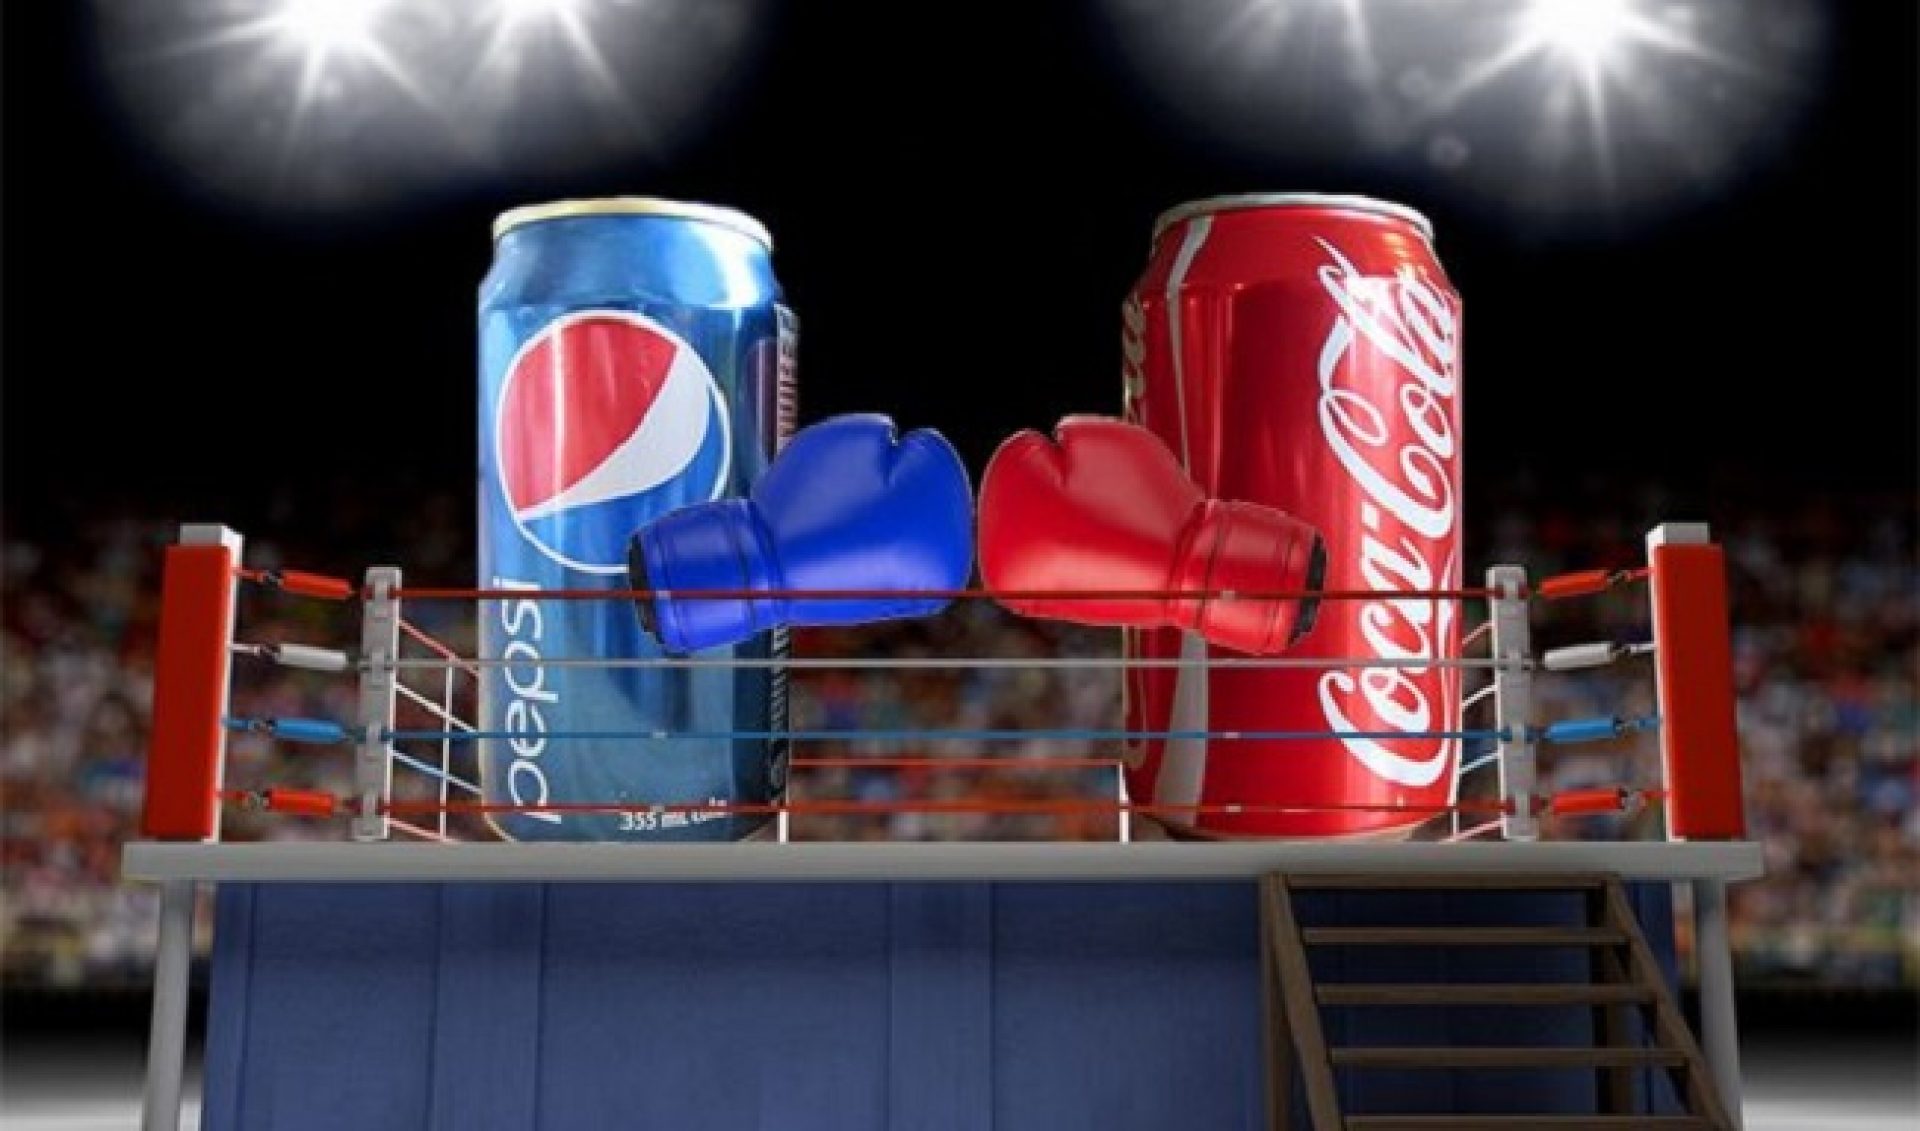 What Can Coke And Pepsi Teach You About Branded Video Content On YouTube?